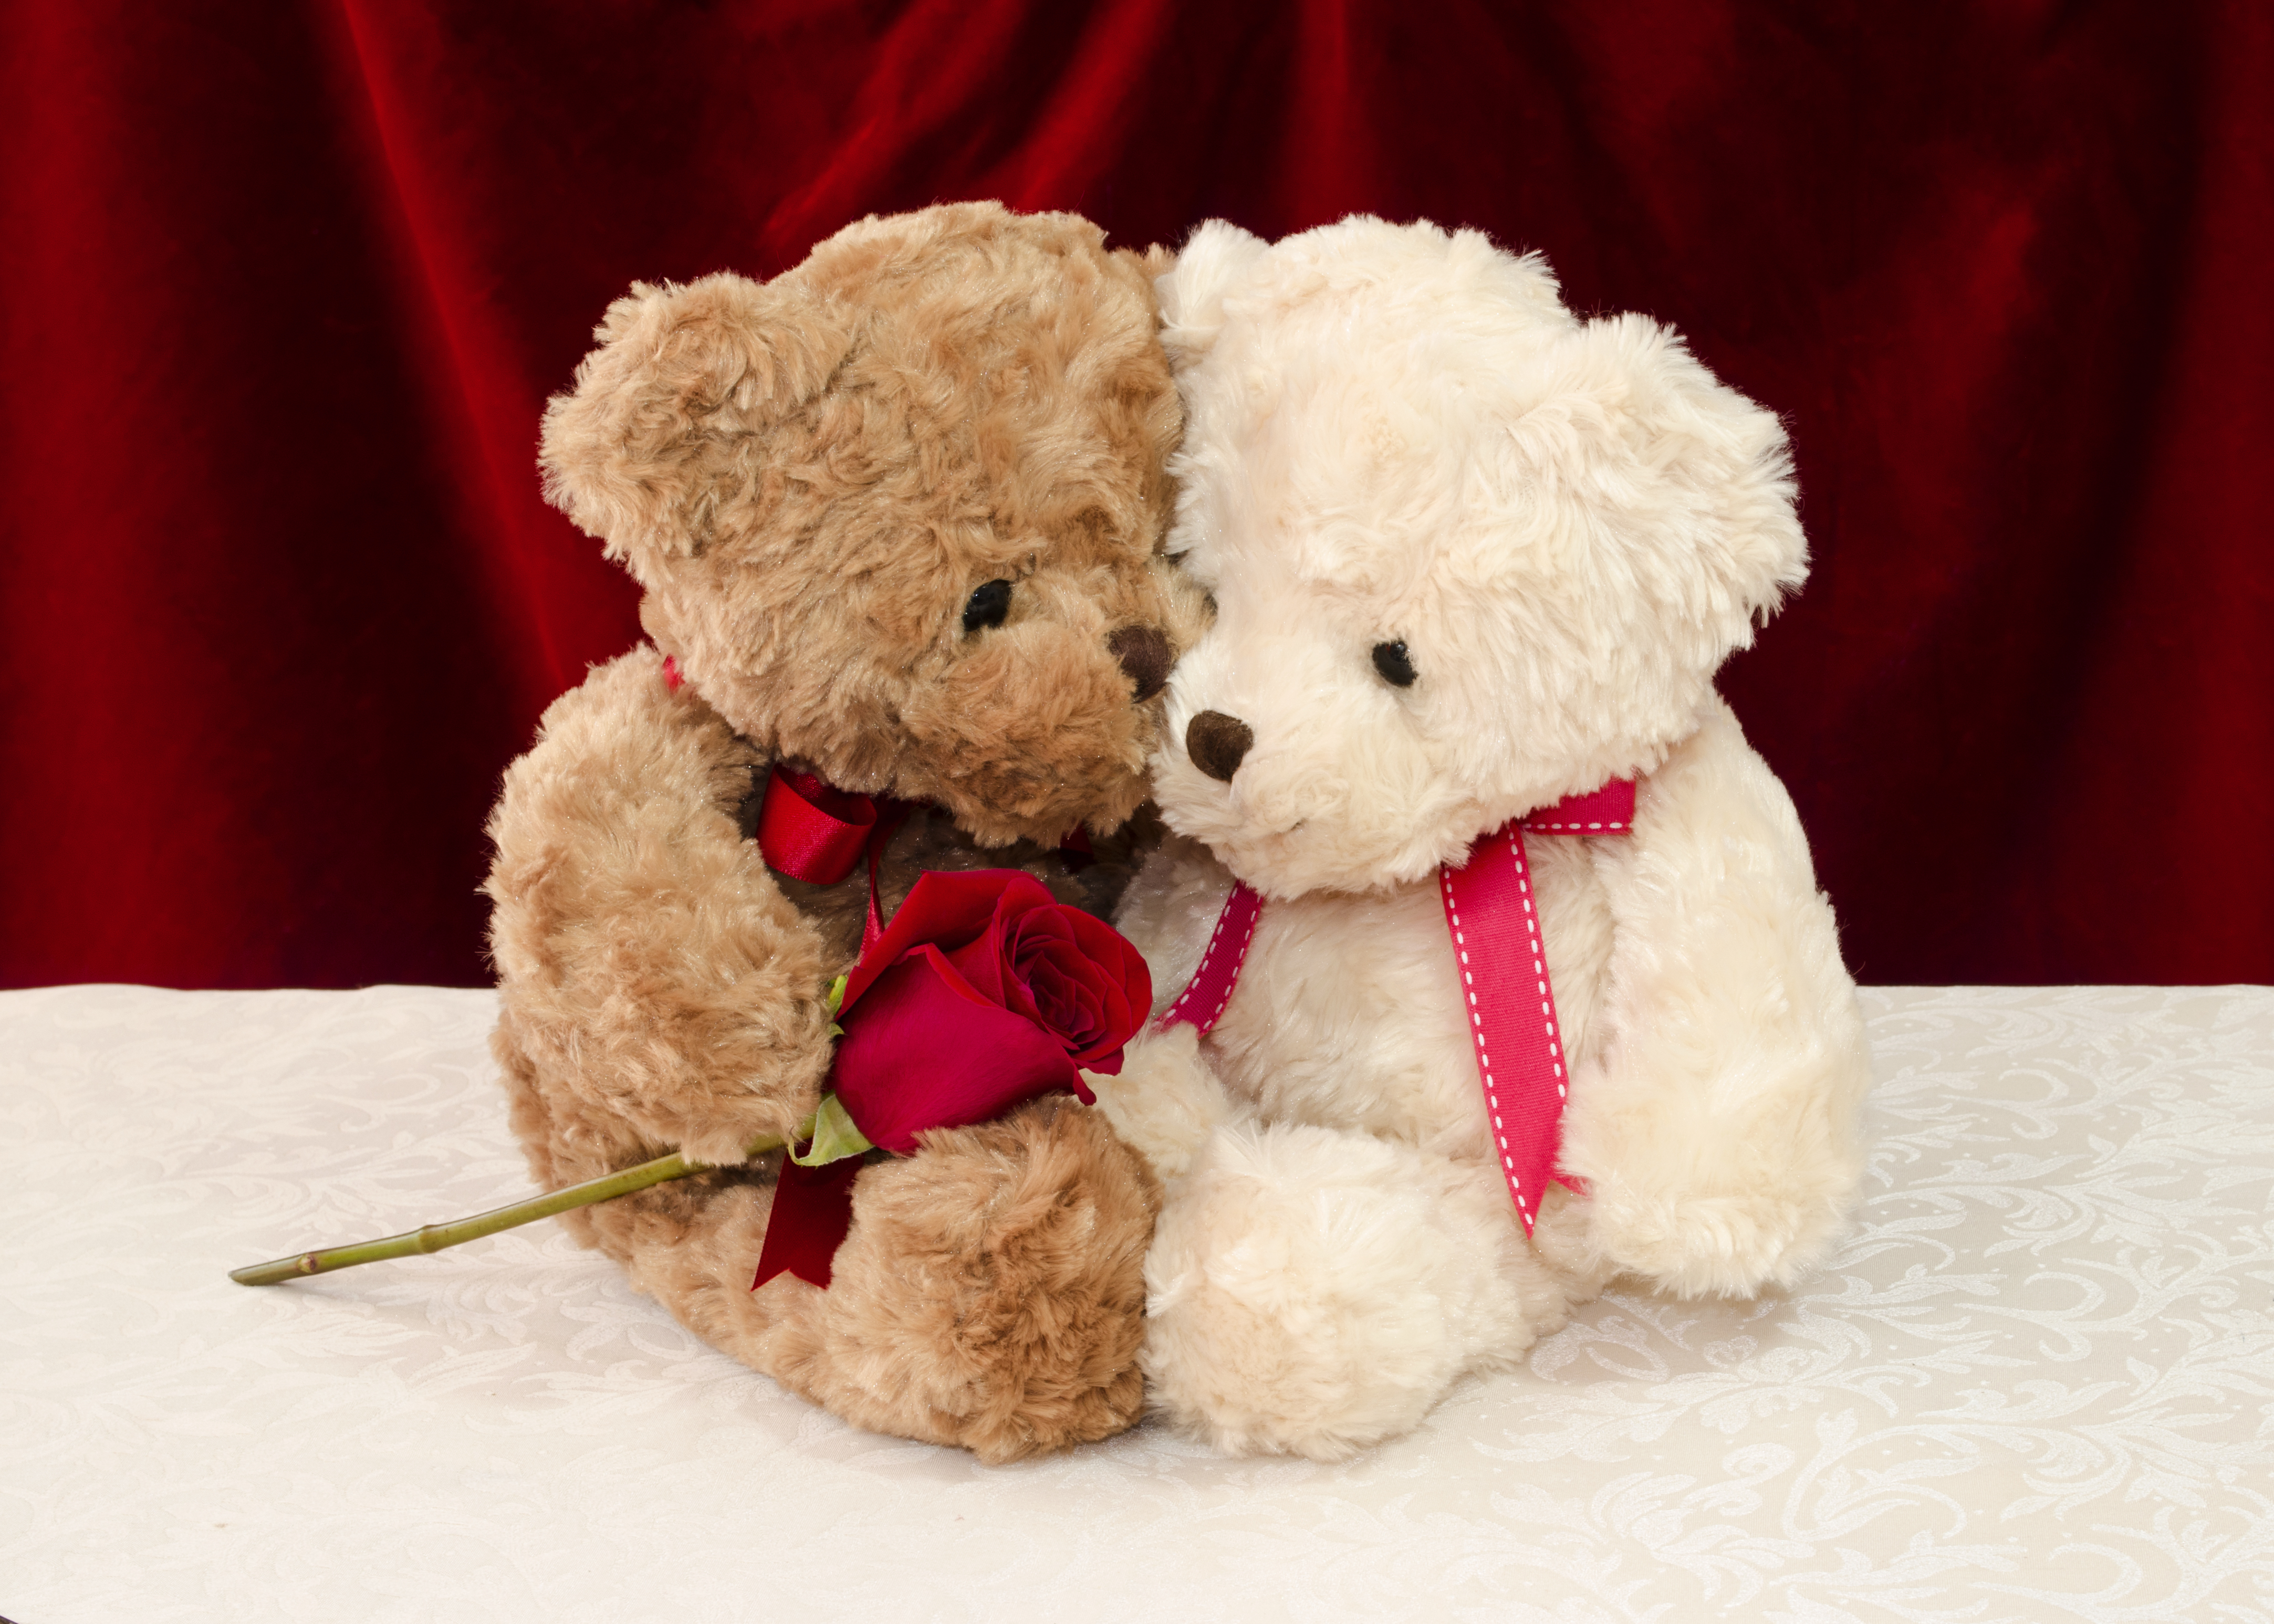 Teddy bear gives a red rose to a special one photo